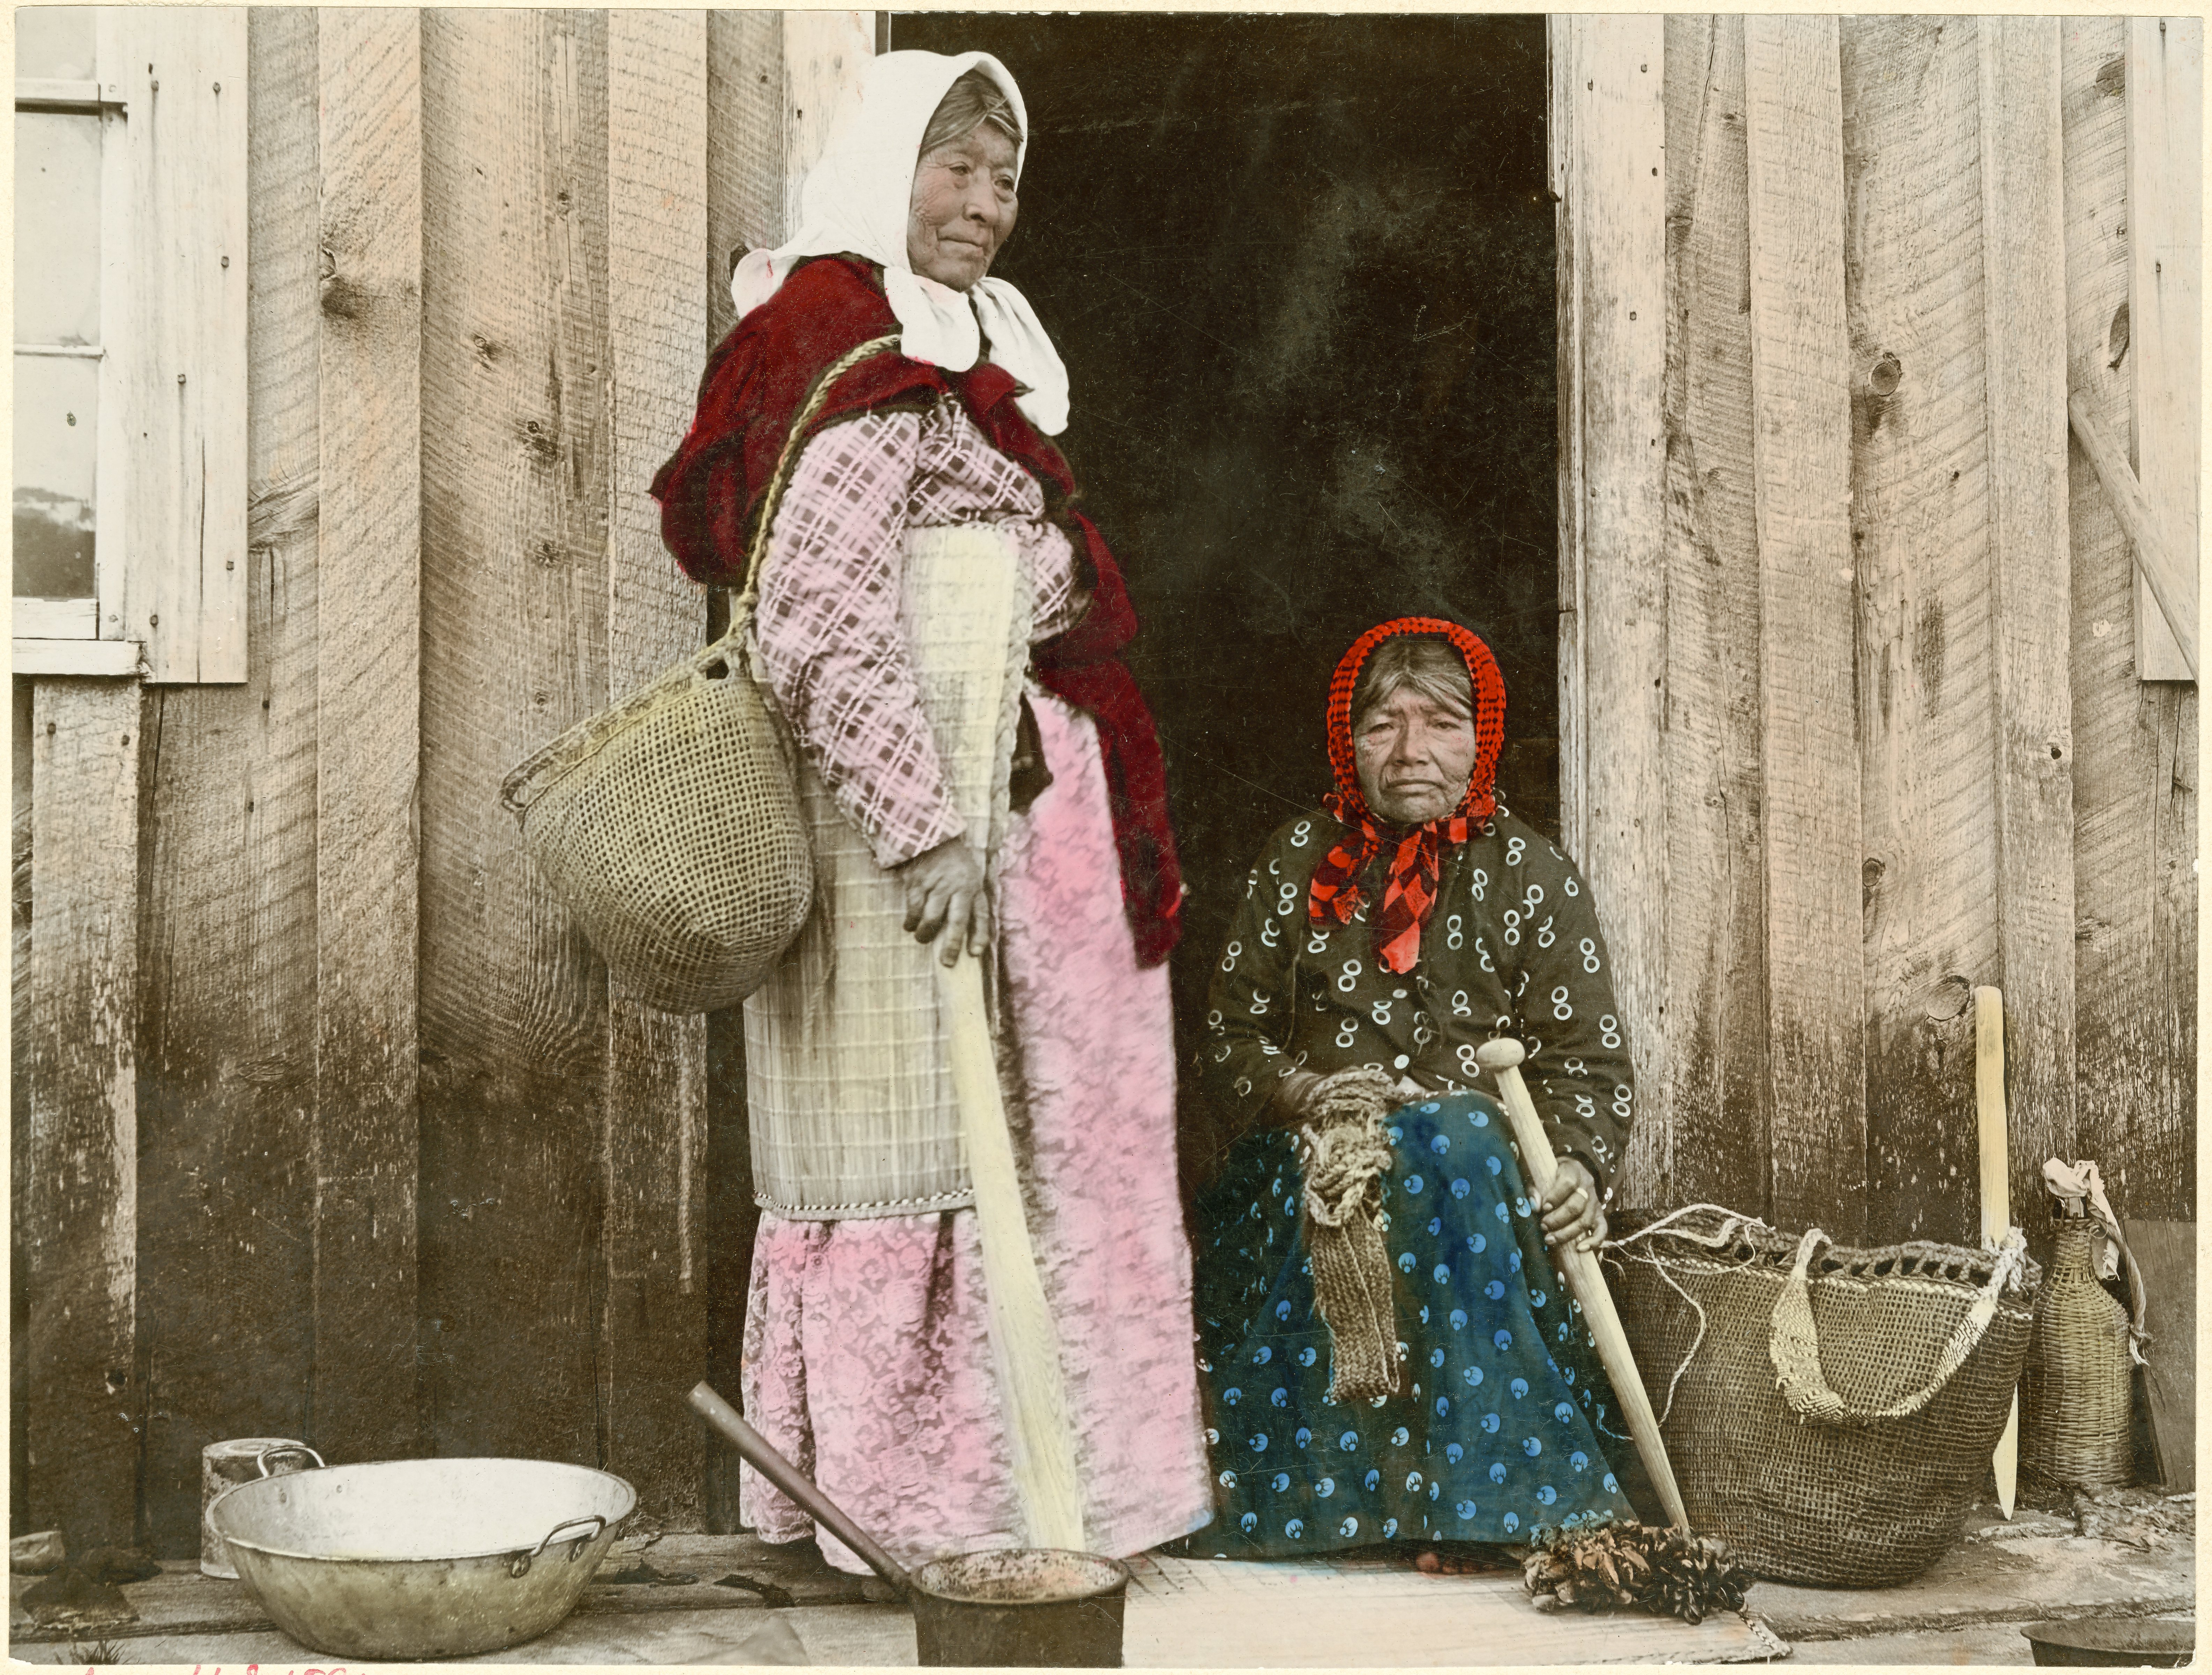 Tsin-is-tum stands in front of an Indian Place house; the woman seated is likely De-o-so, wife of Chief Kotata.